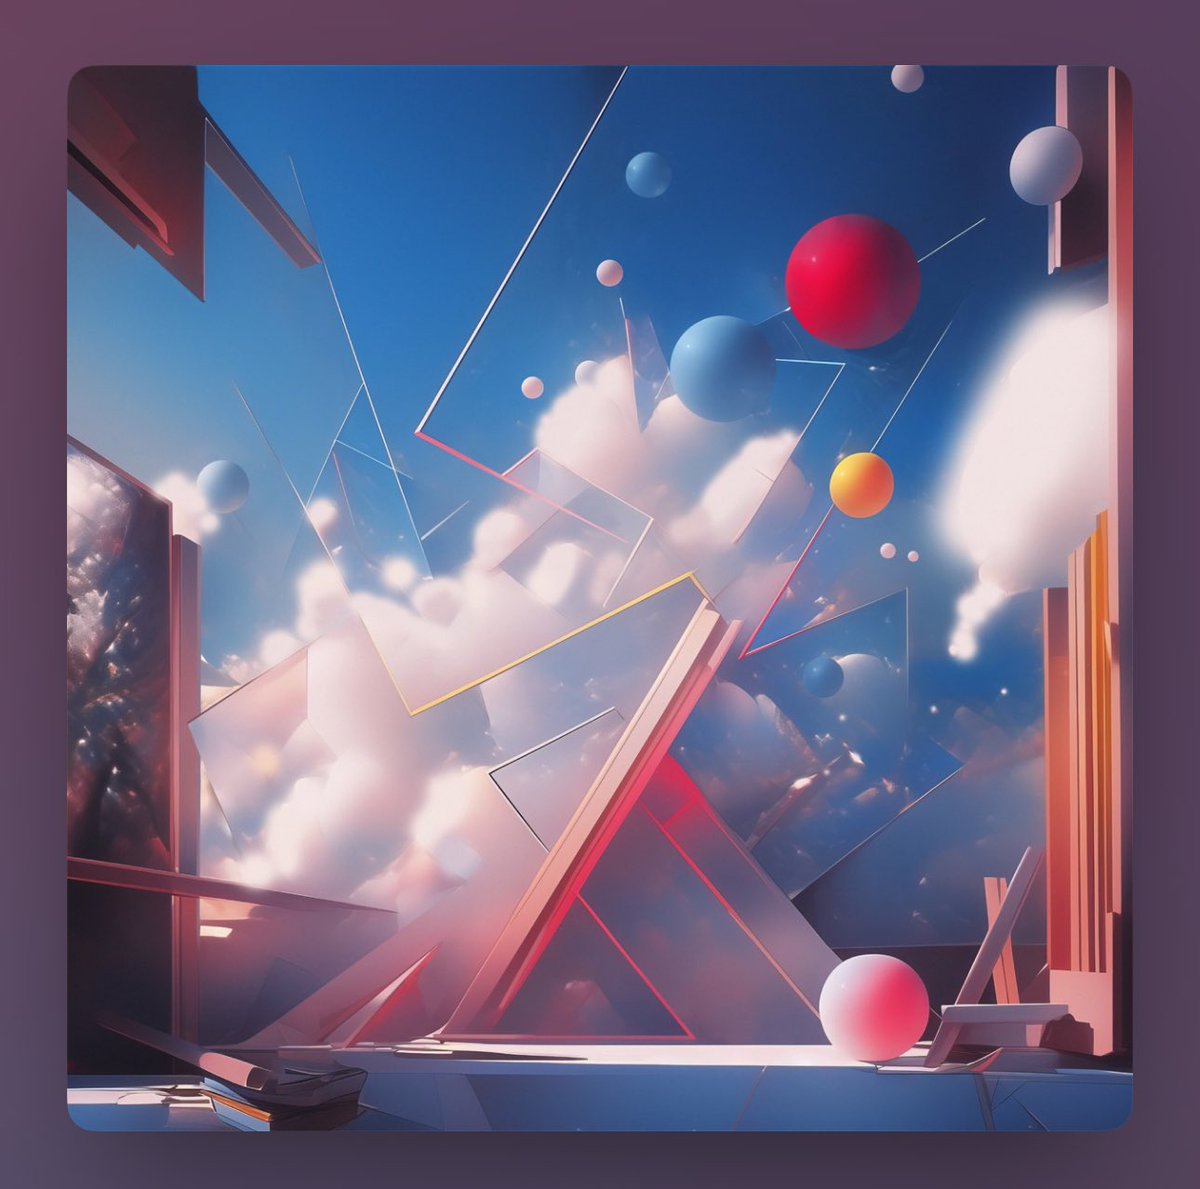 @Northlane dropped #MirrorsEdge EP and it’s just incredible (as expected). I was not ready for the carnage in the middle section of “Let Me Disappear”. 😮‍💨😮‍💨